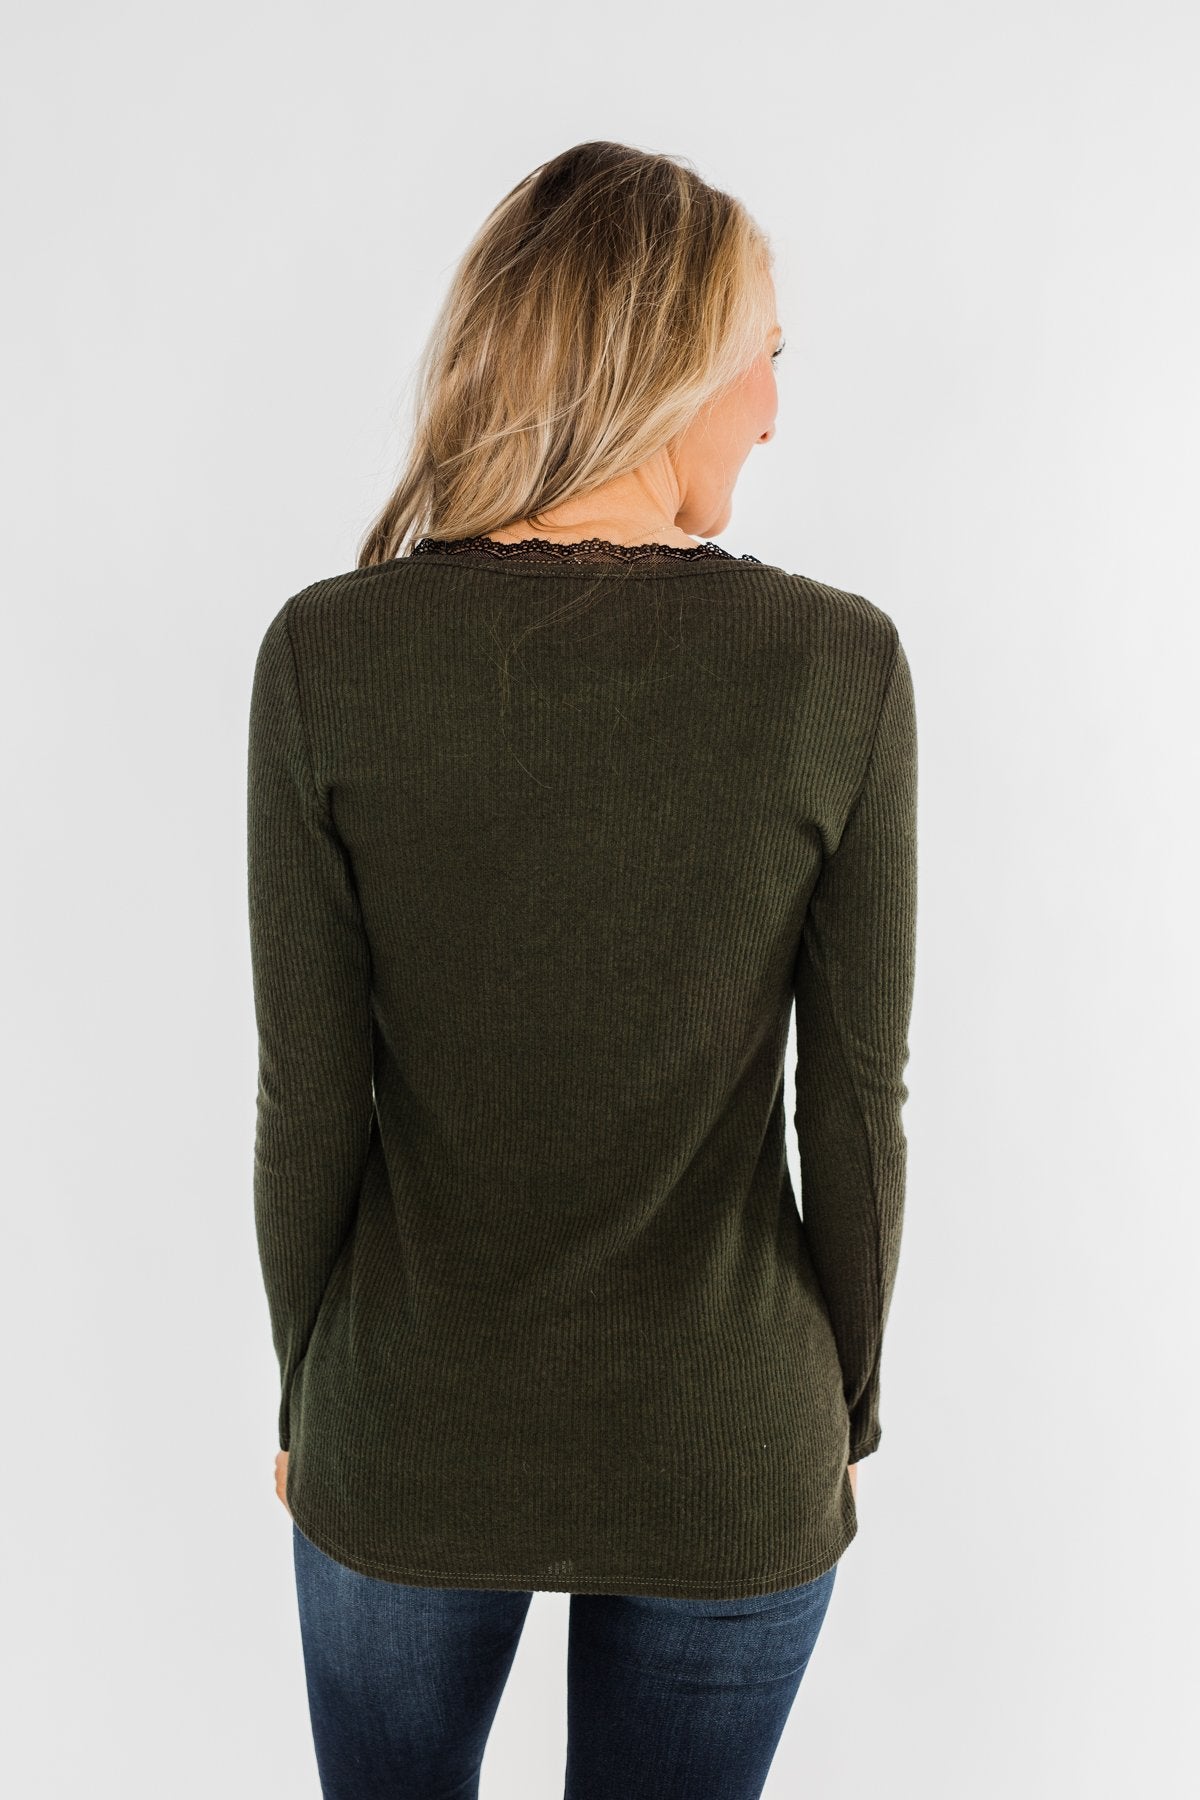 Don't Think Twice Lace Trimmed Top- Dark Olive